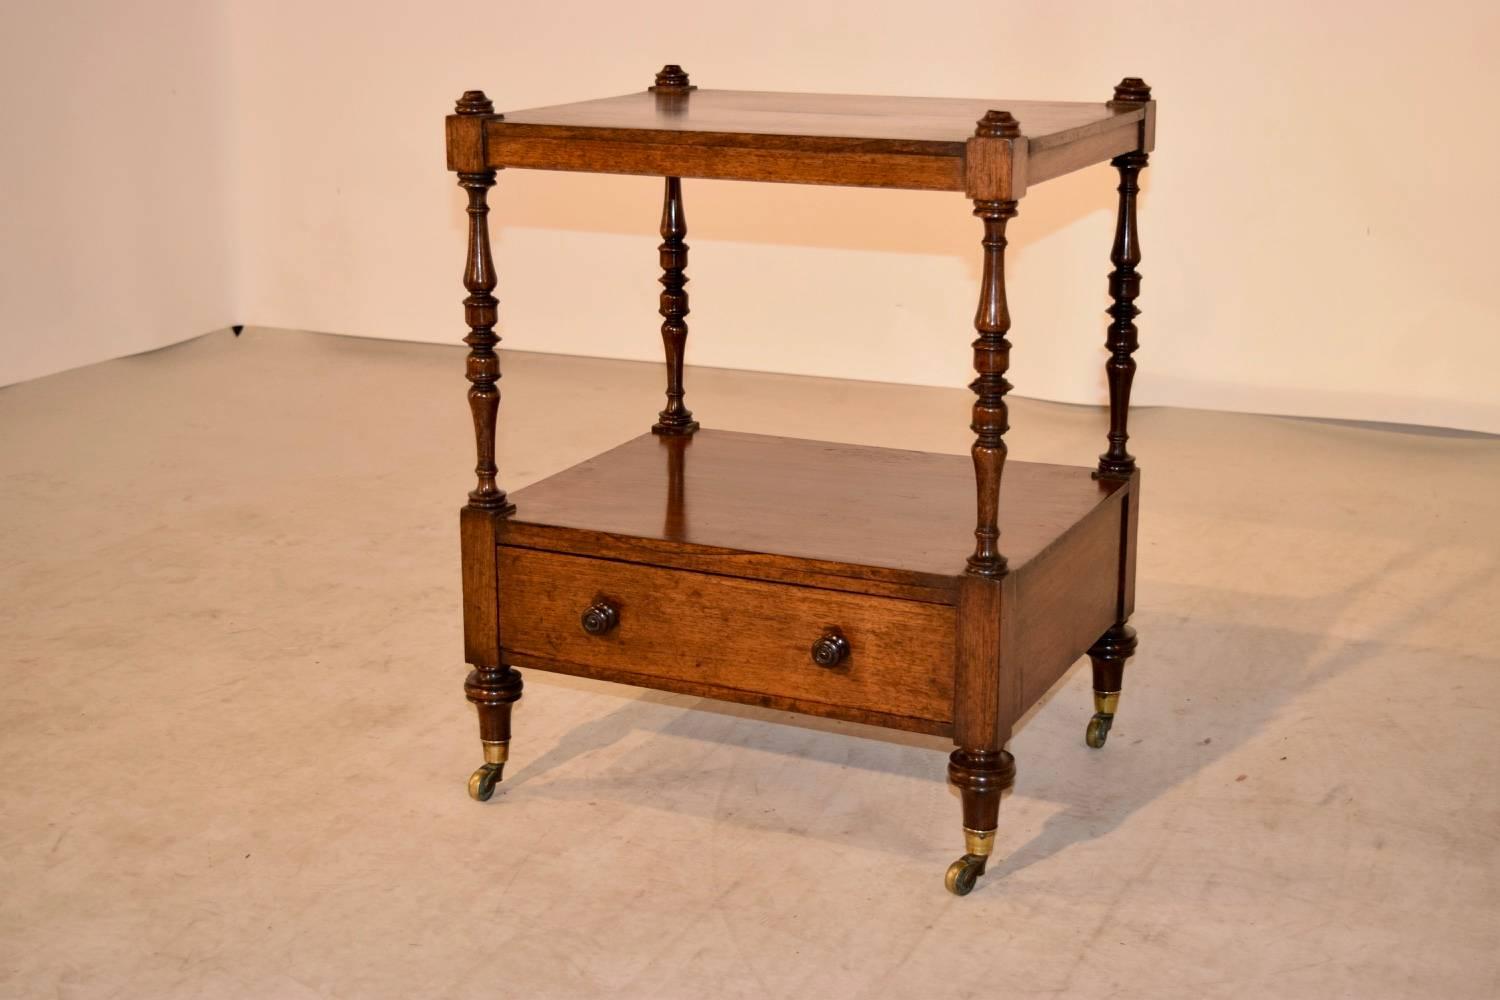 19th century English small shelf made from rosewood. There are hand-turned finials on the top which follow down to two shelves, the bottom shelf with a drawer. The piece has wonderfully hand-turned shelf supports and feet, supported on brass castors.